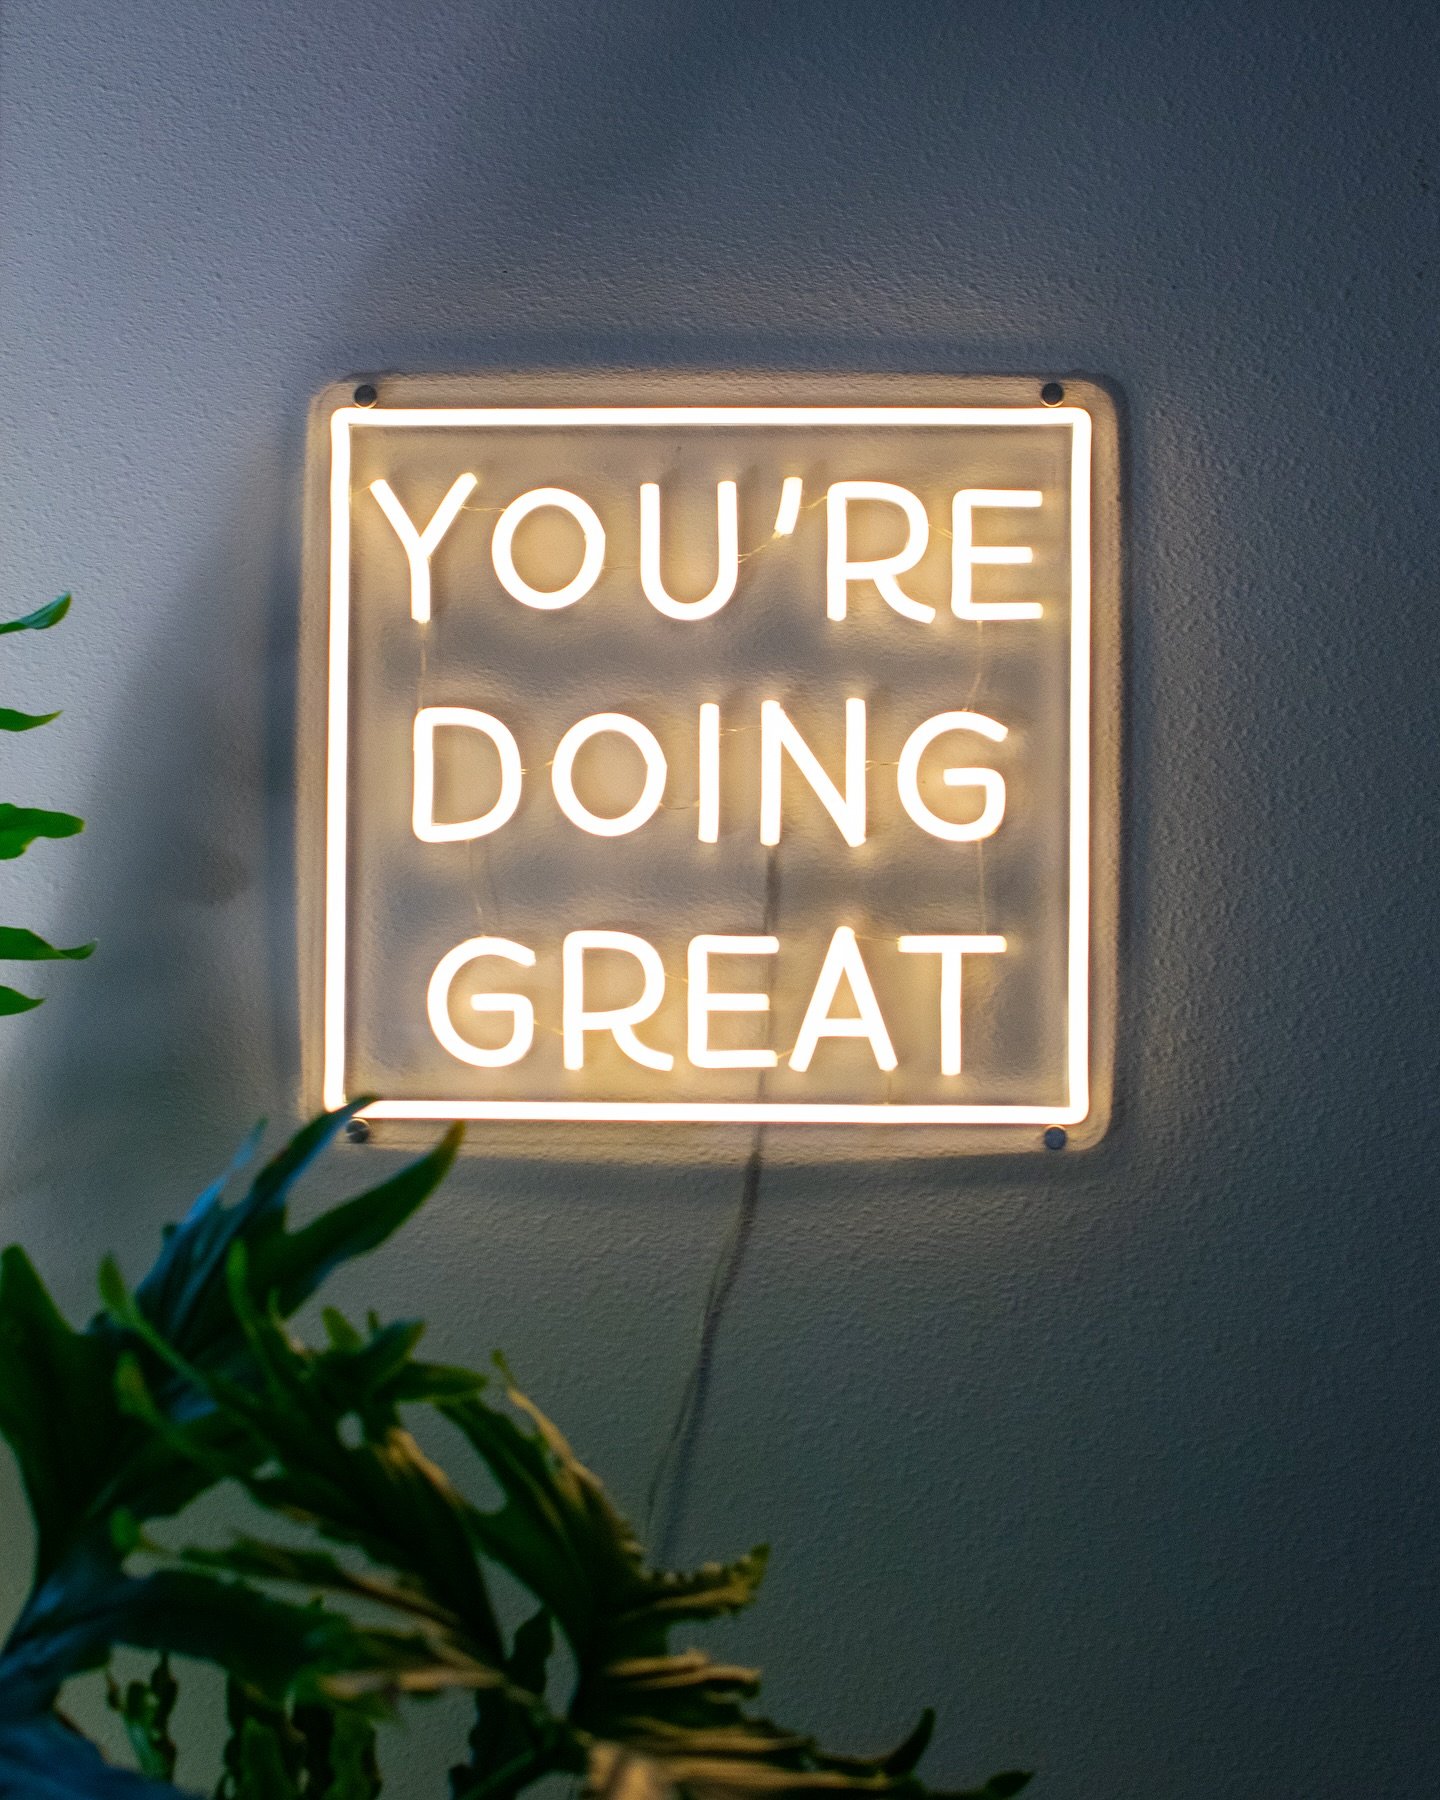 PSA to start off the week: keep up the great work, I&rsquo;m proud of you! 😘